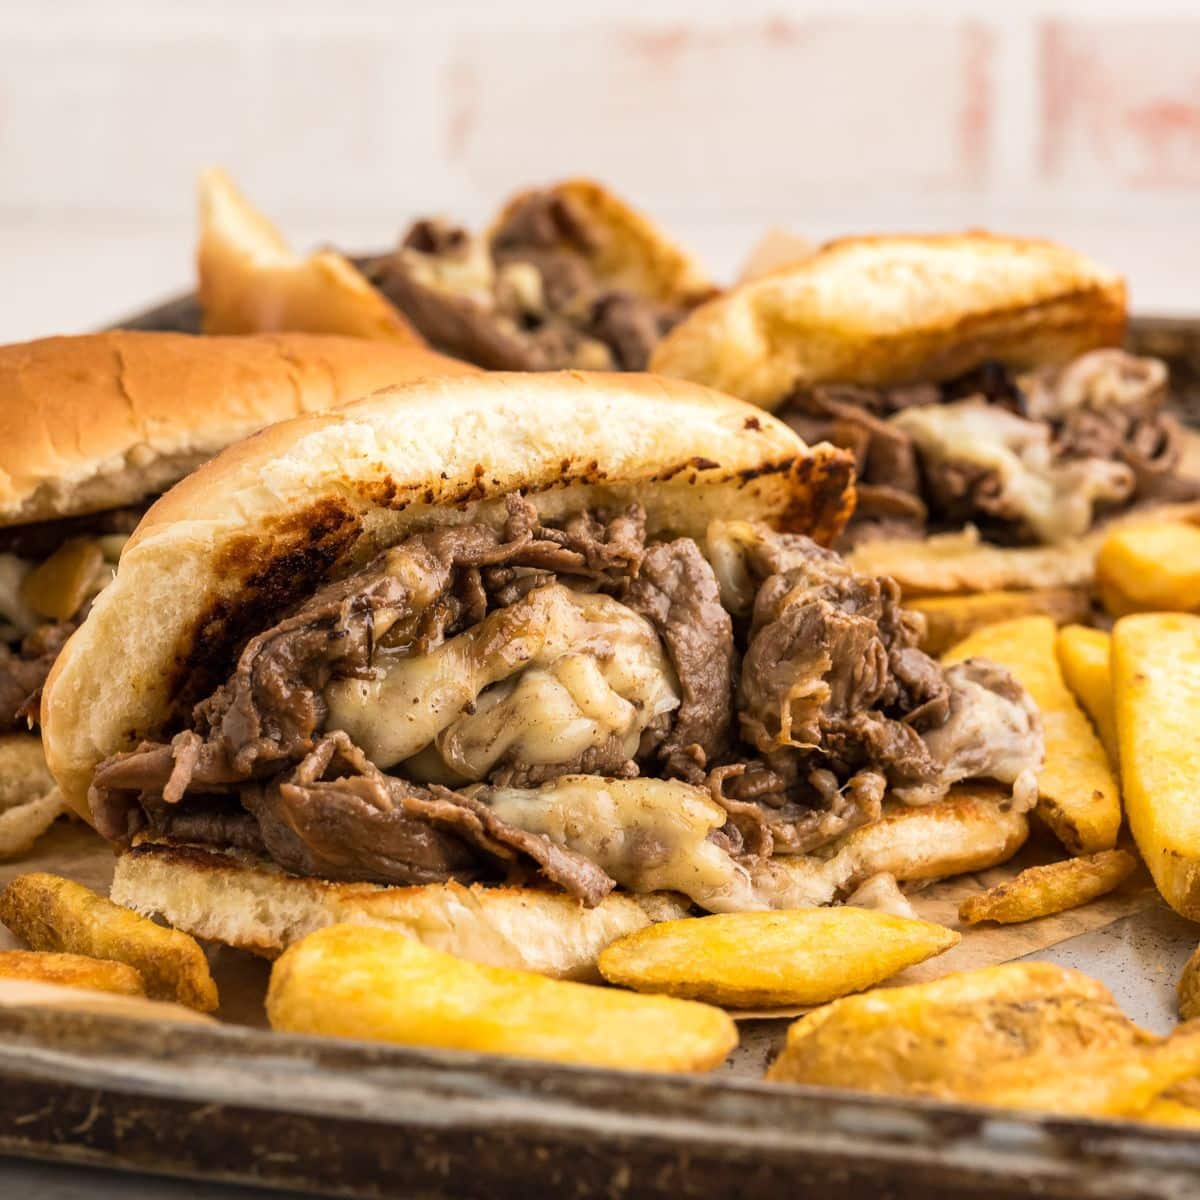 https://www.thefreshcooky.com/wp-content/uploads/2020/08/philly-cheese-steak-square.jpg